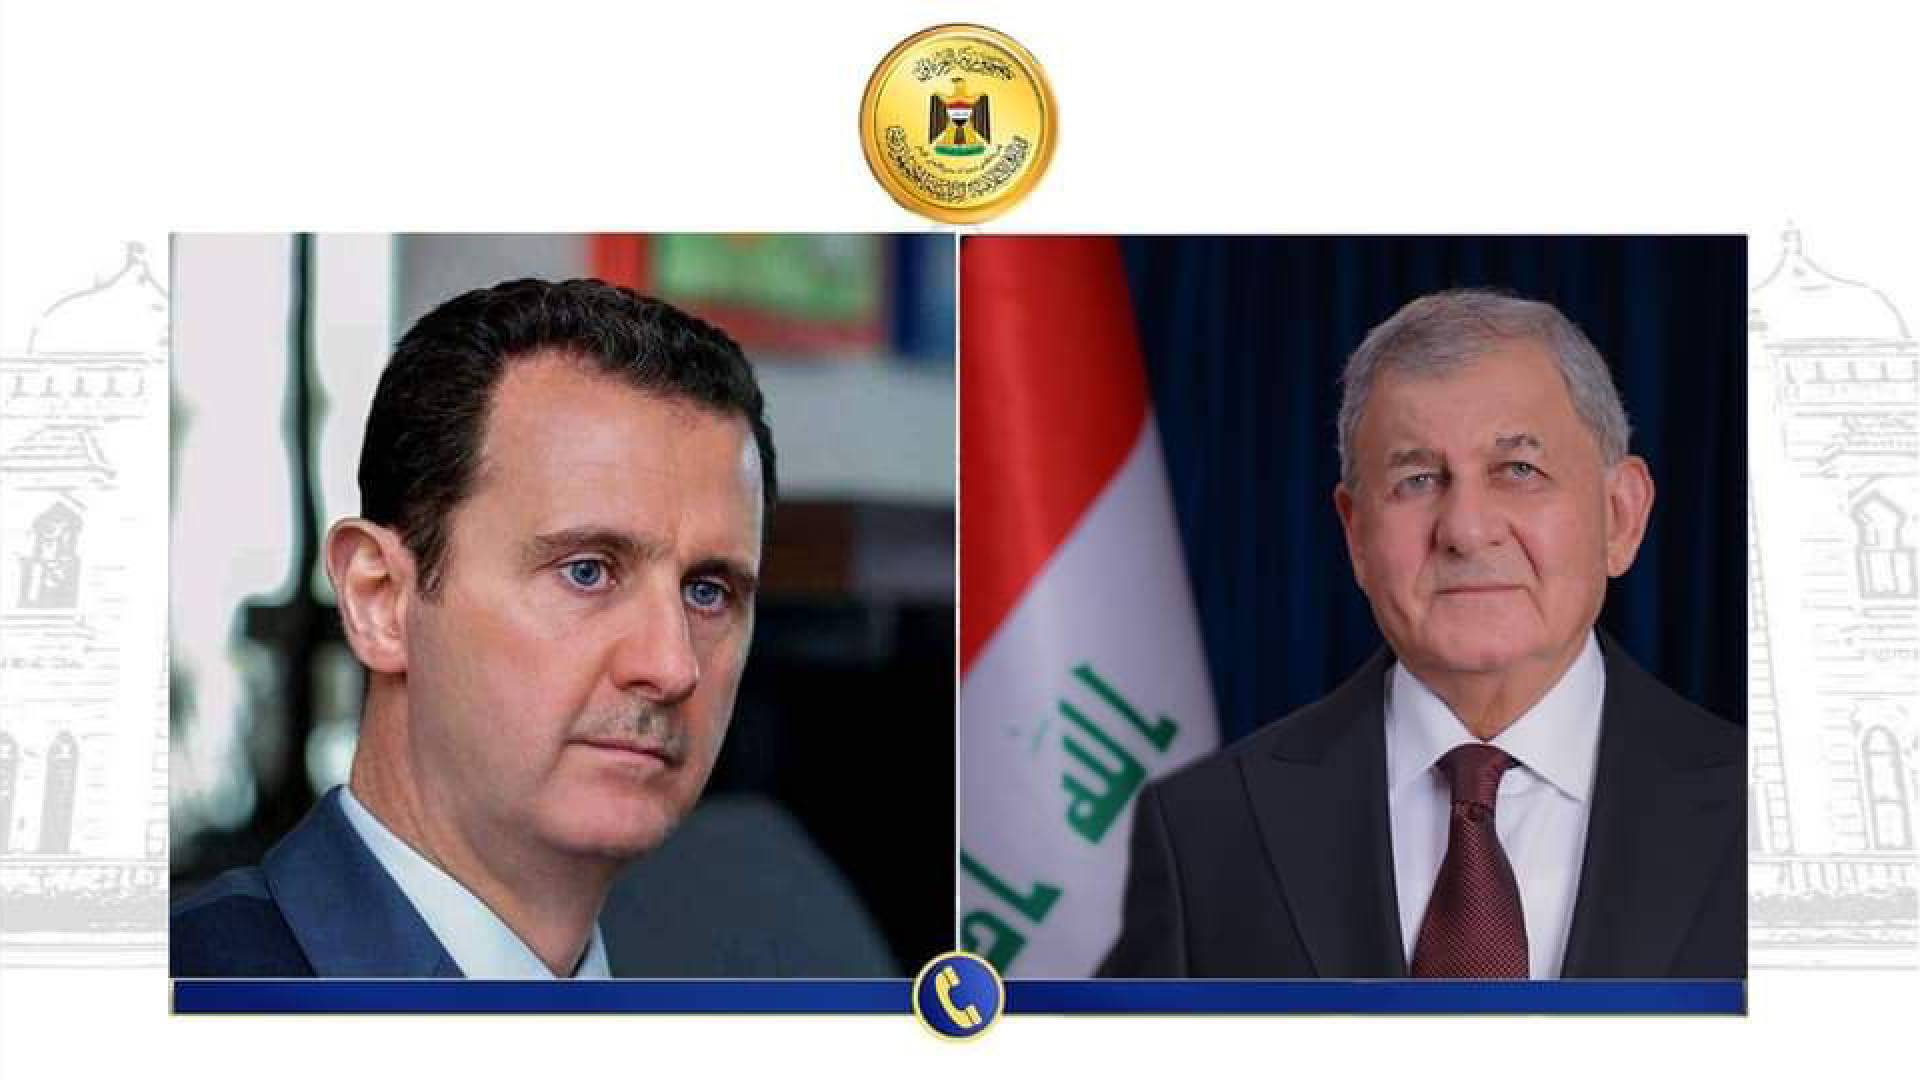 Presidents of Iraq and Syria